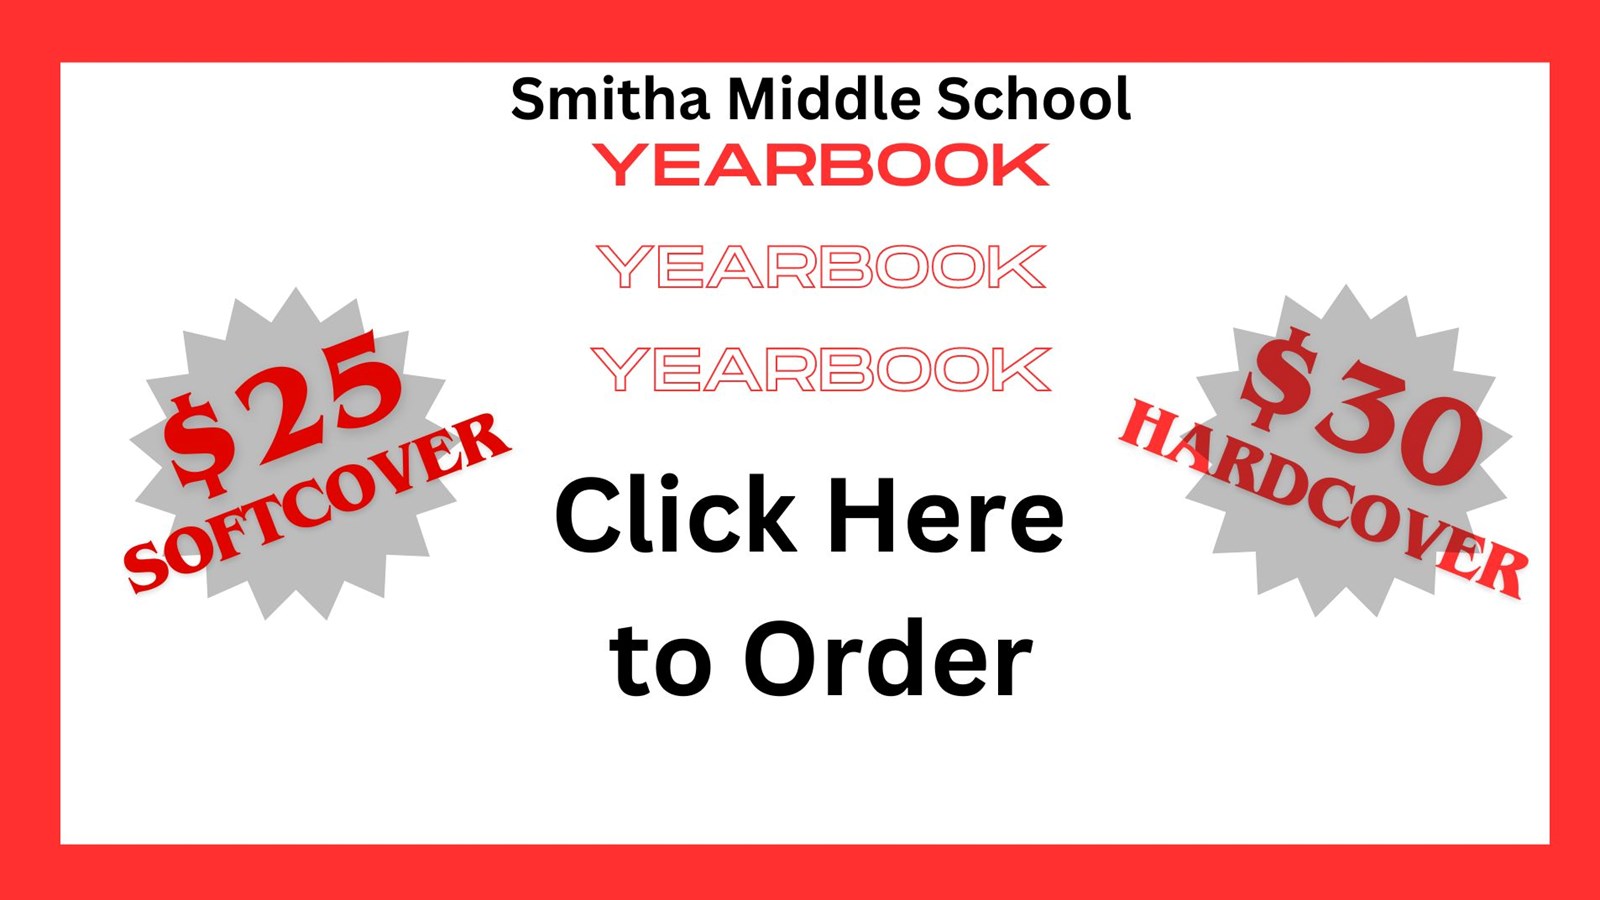 white background with red frame. Text reads Smitha Middle School Click here to order. $25 soft cover $30 hard cover